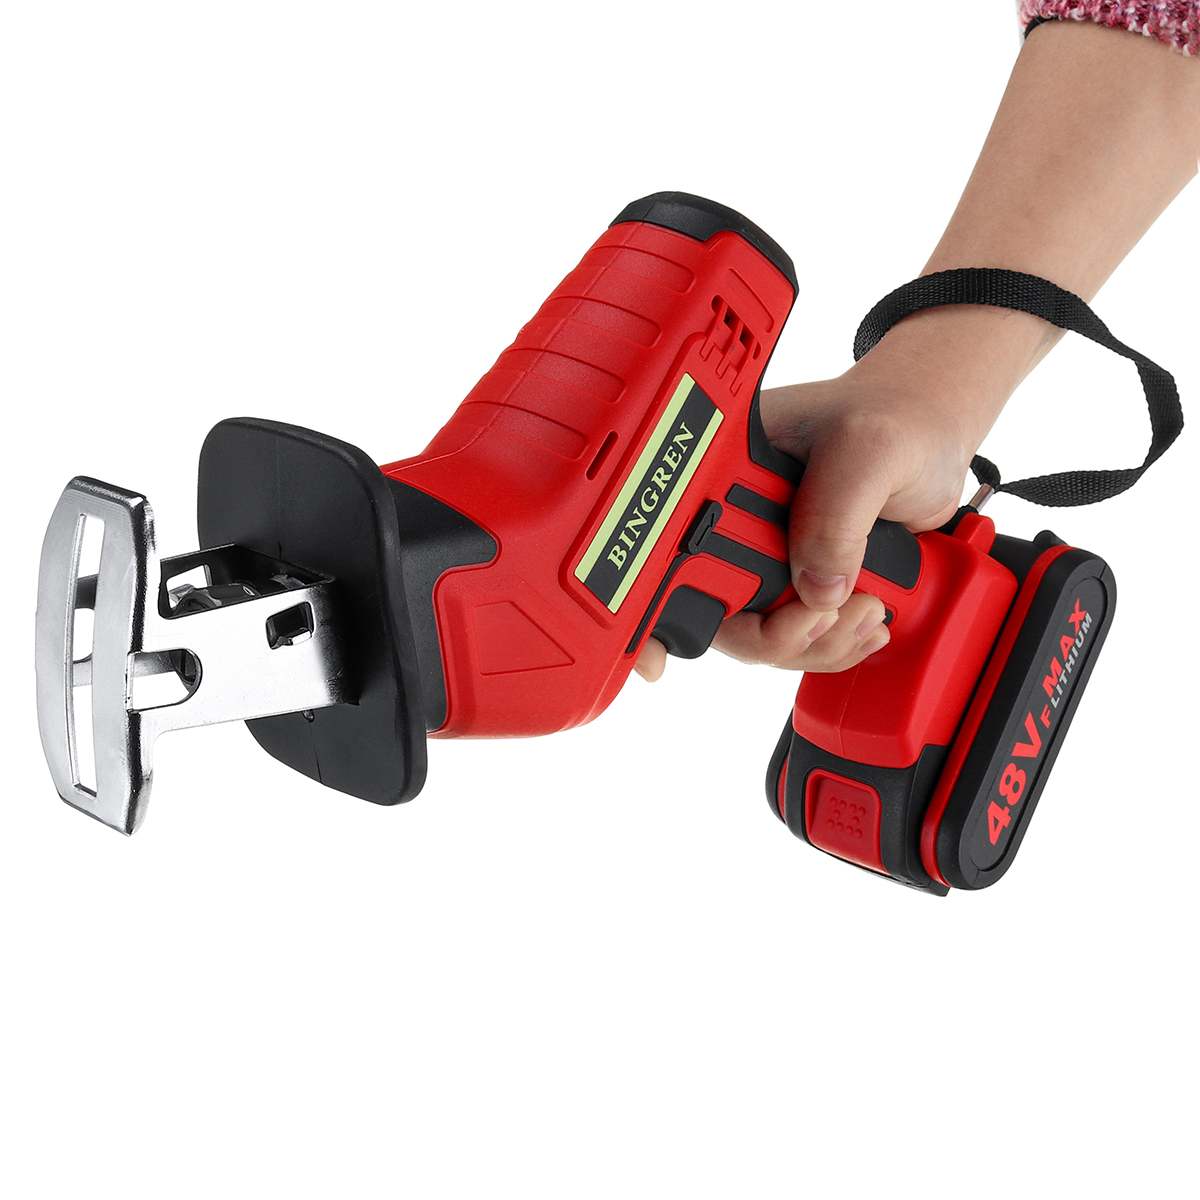 Rechargeable 48V Cordless Reciprocating Saw Electric Saw with 1/2 Li-ion Battery Blade Power Tool Metal Wood Cutting Tool